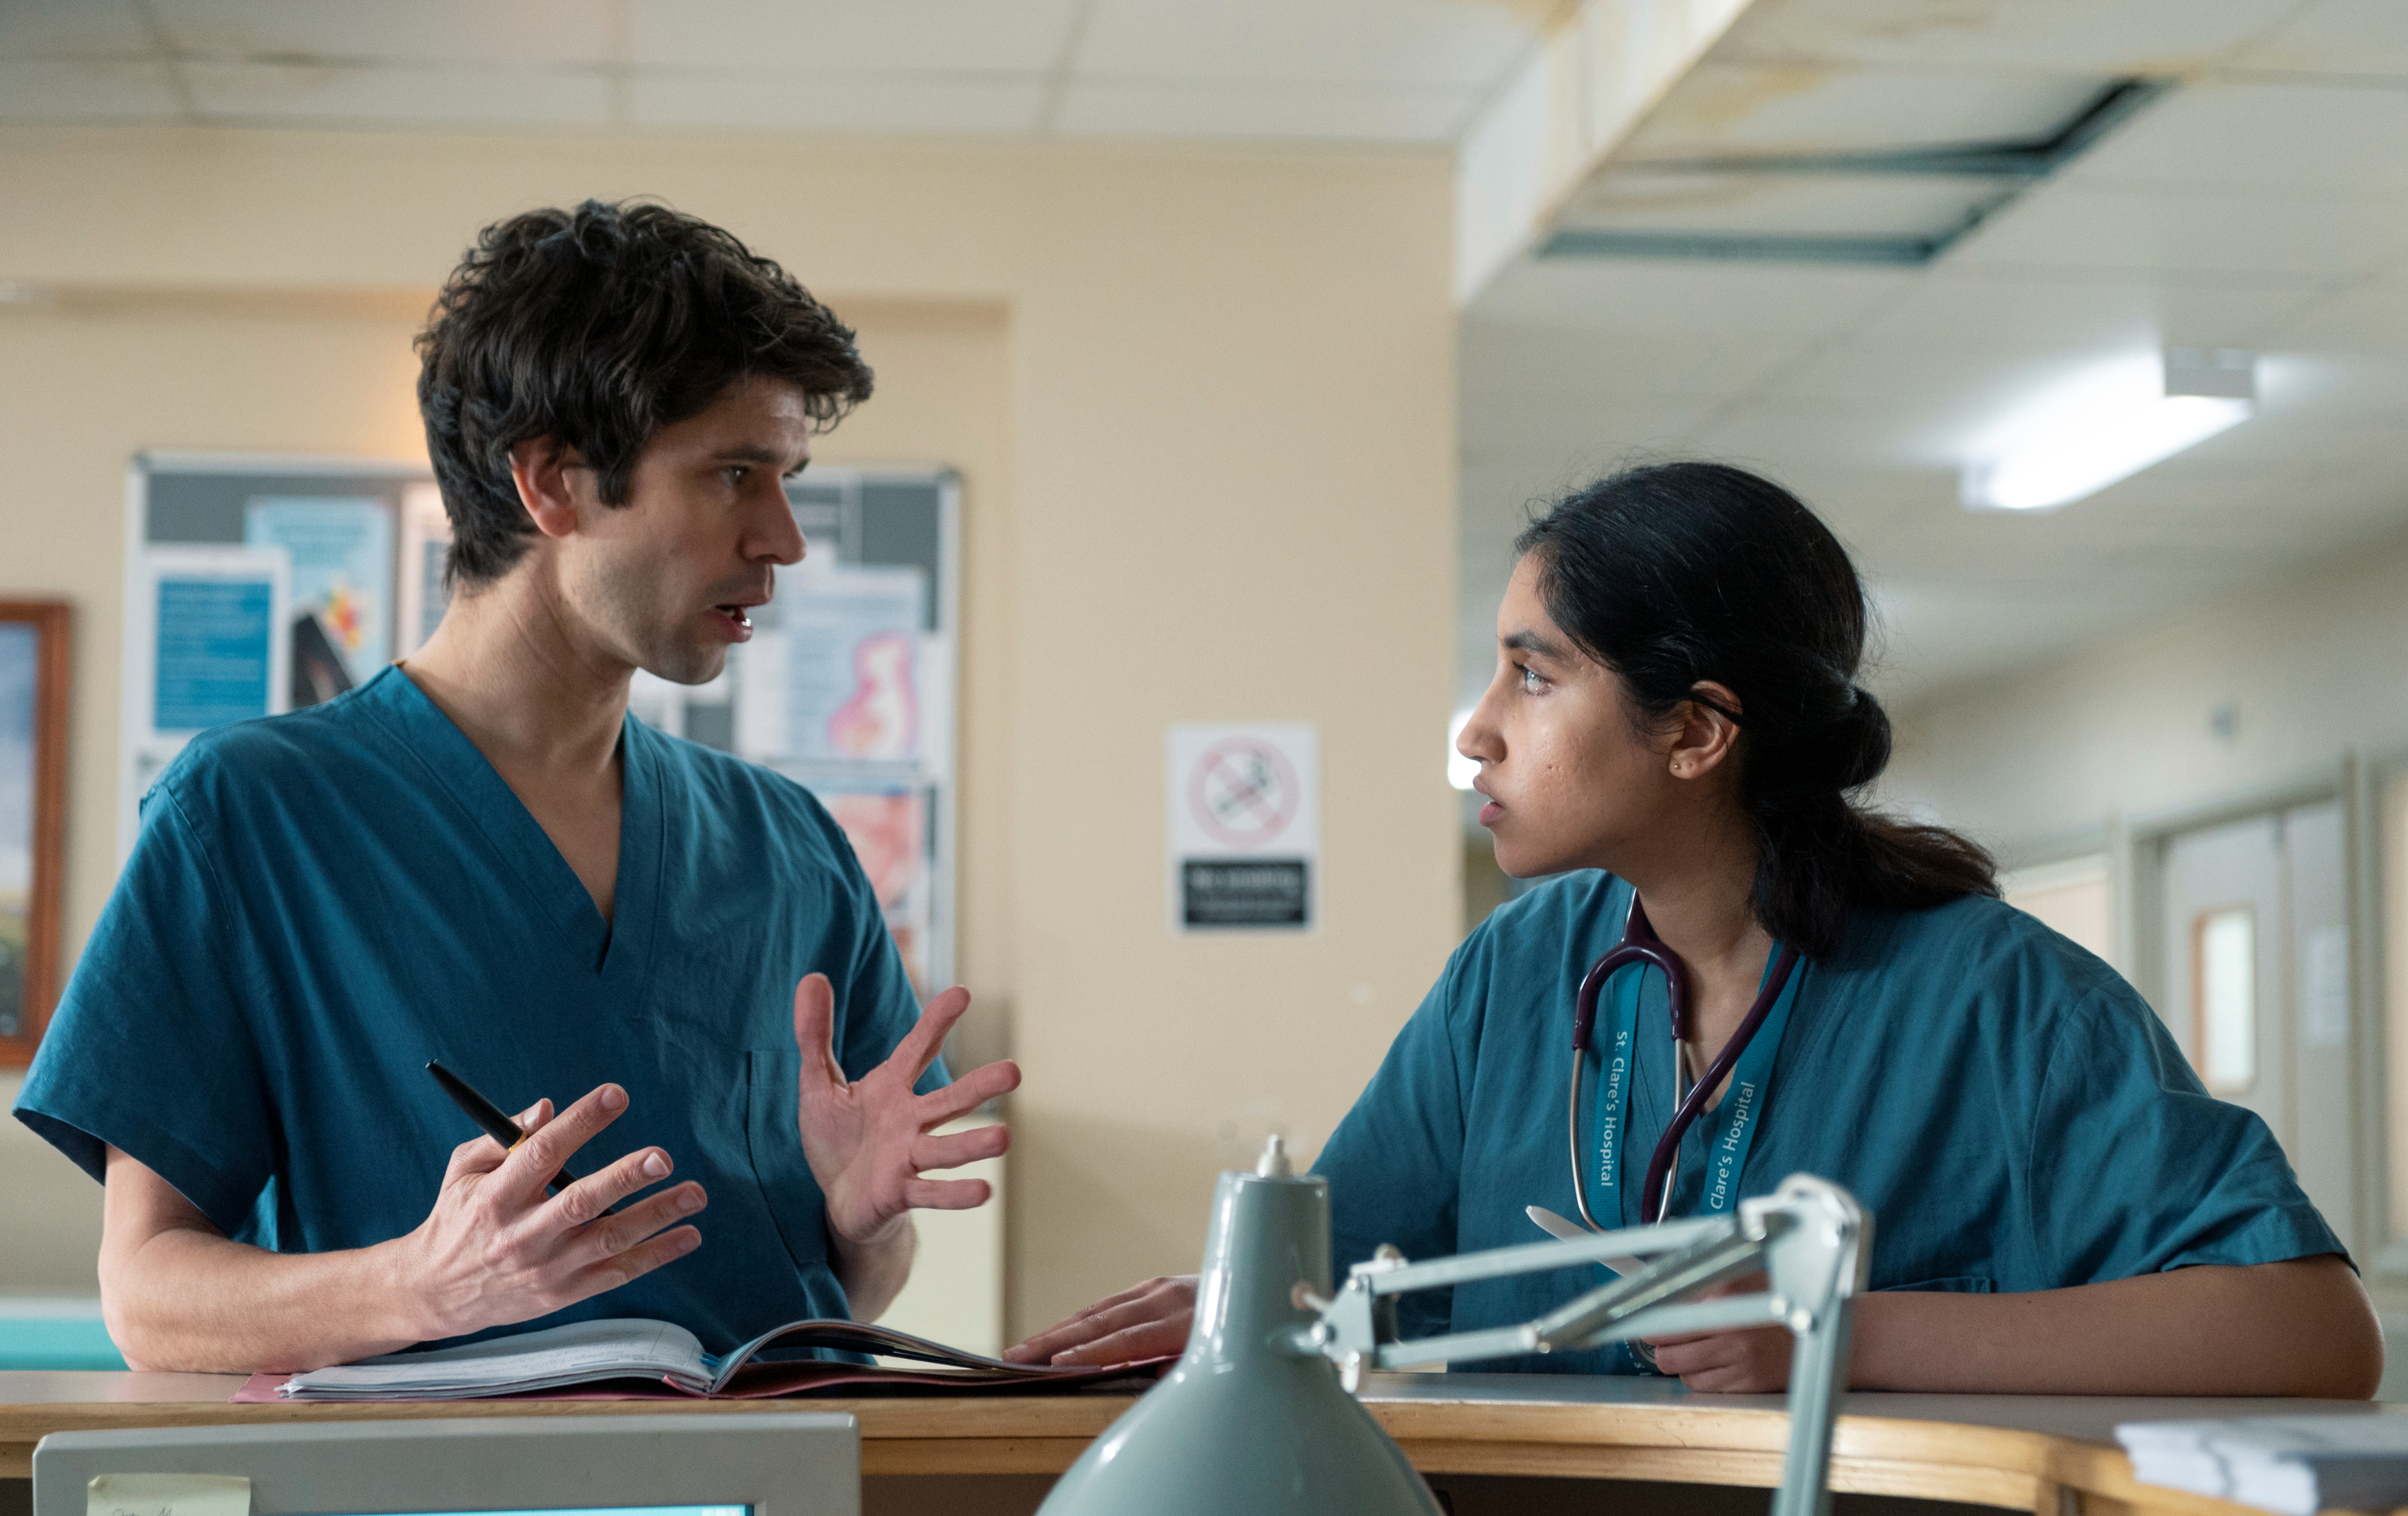 Two actors in medical scrubs engaged in conversation on a hospital set